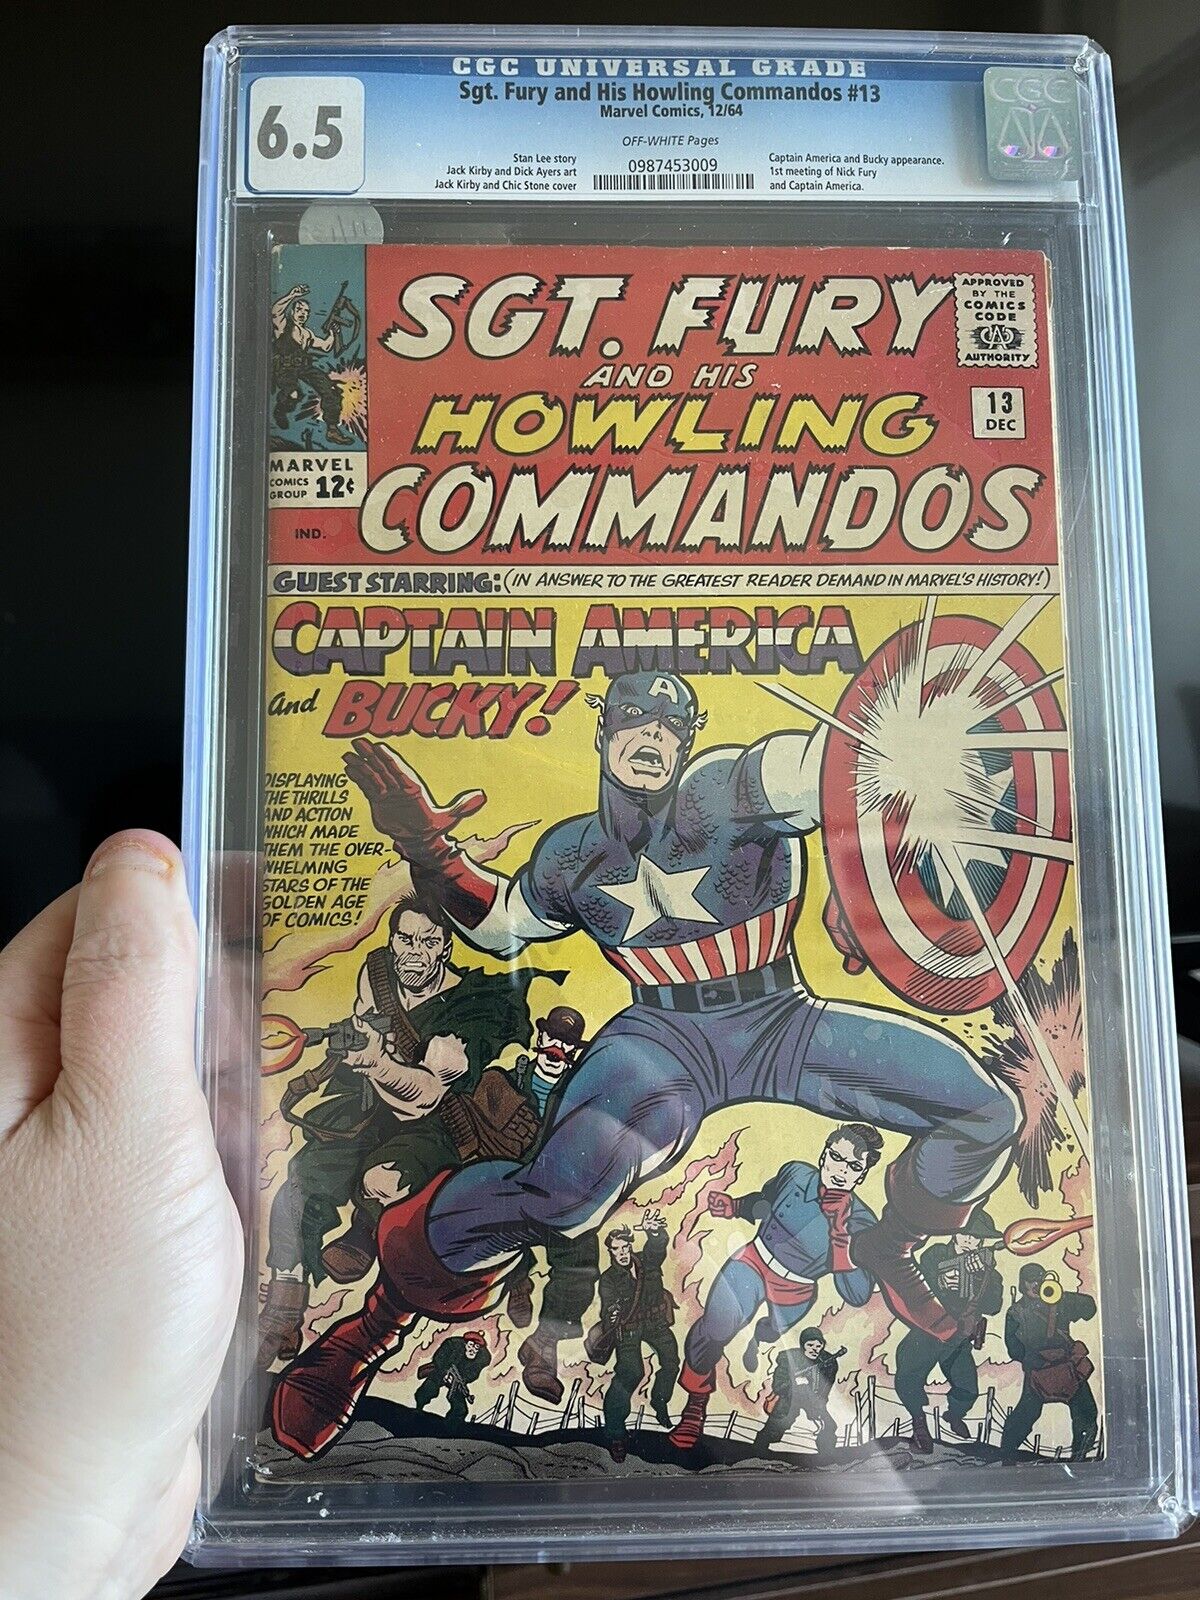 Sgt. Fury and His Howling Commandos #13 ⭐ CGC 6.5 ⭐ Captain America Marvel 1964